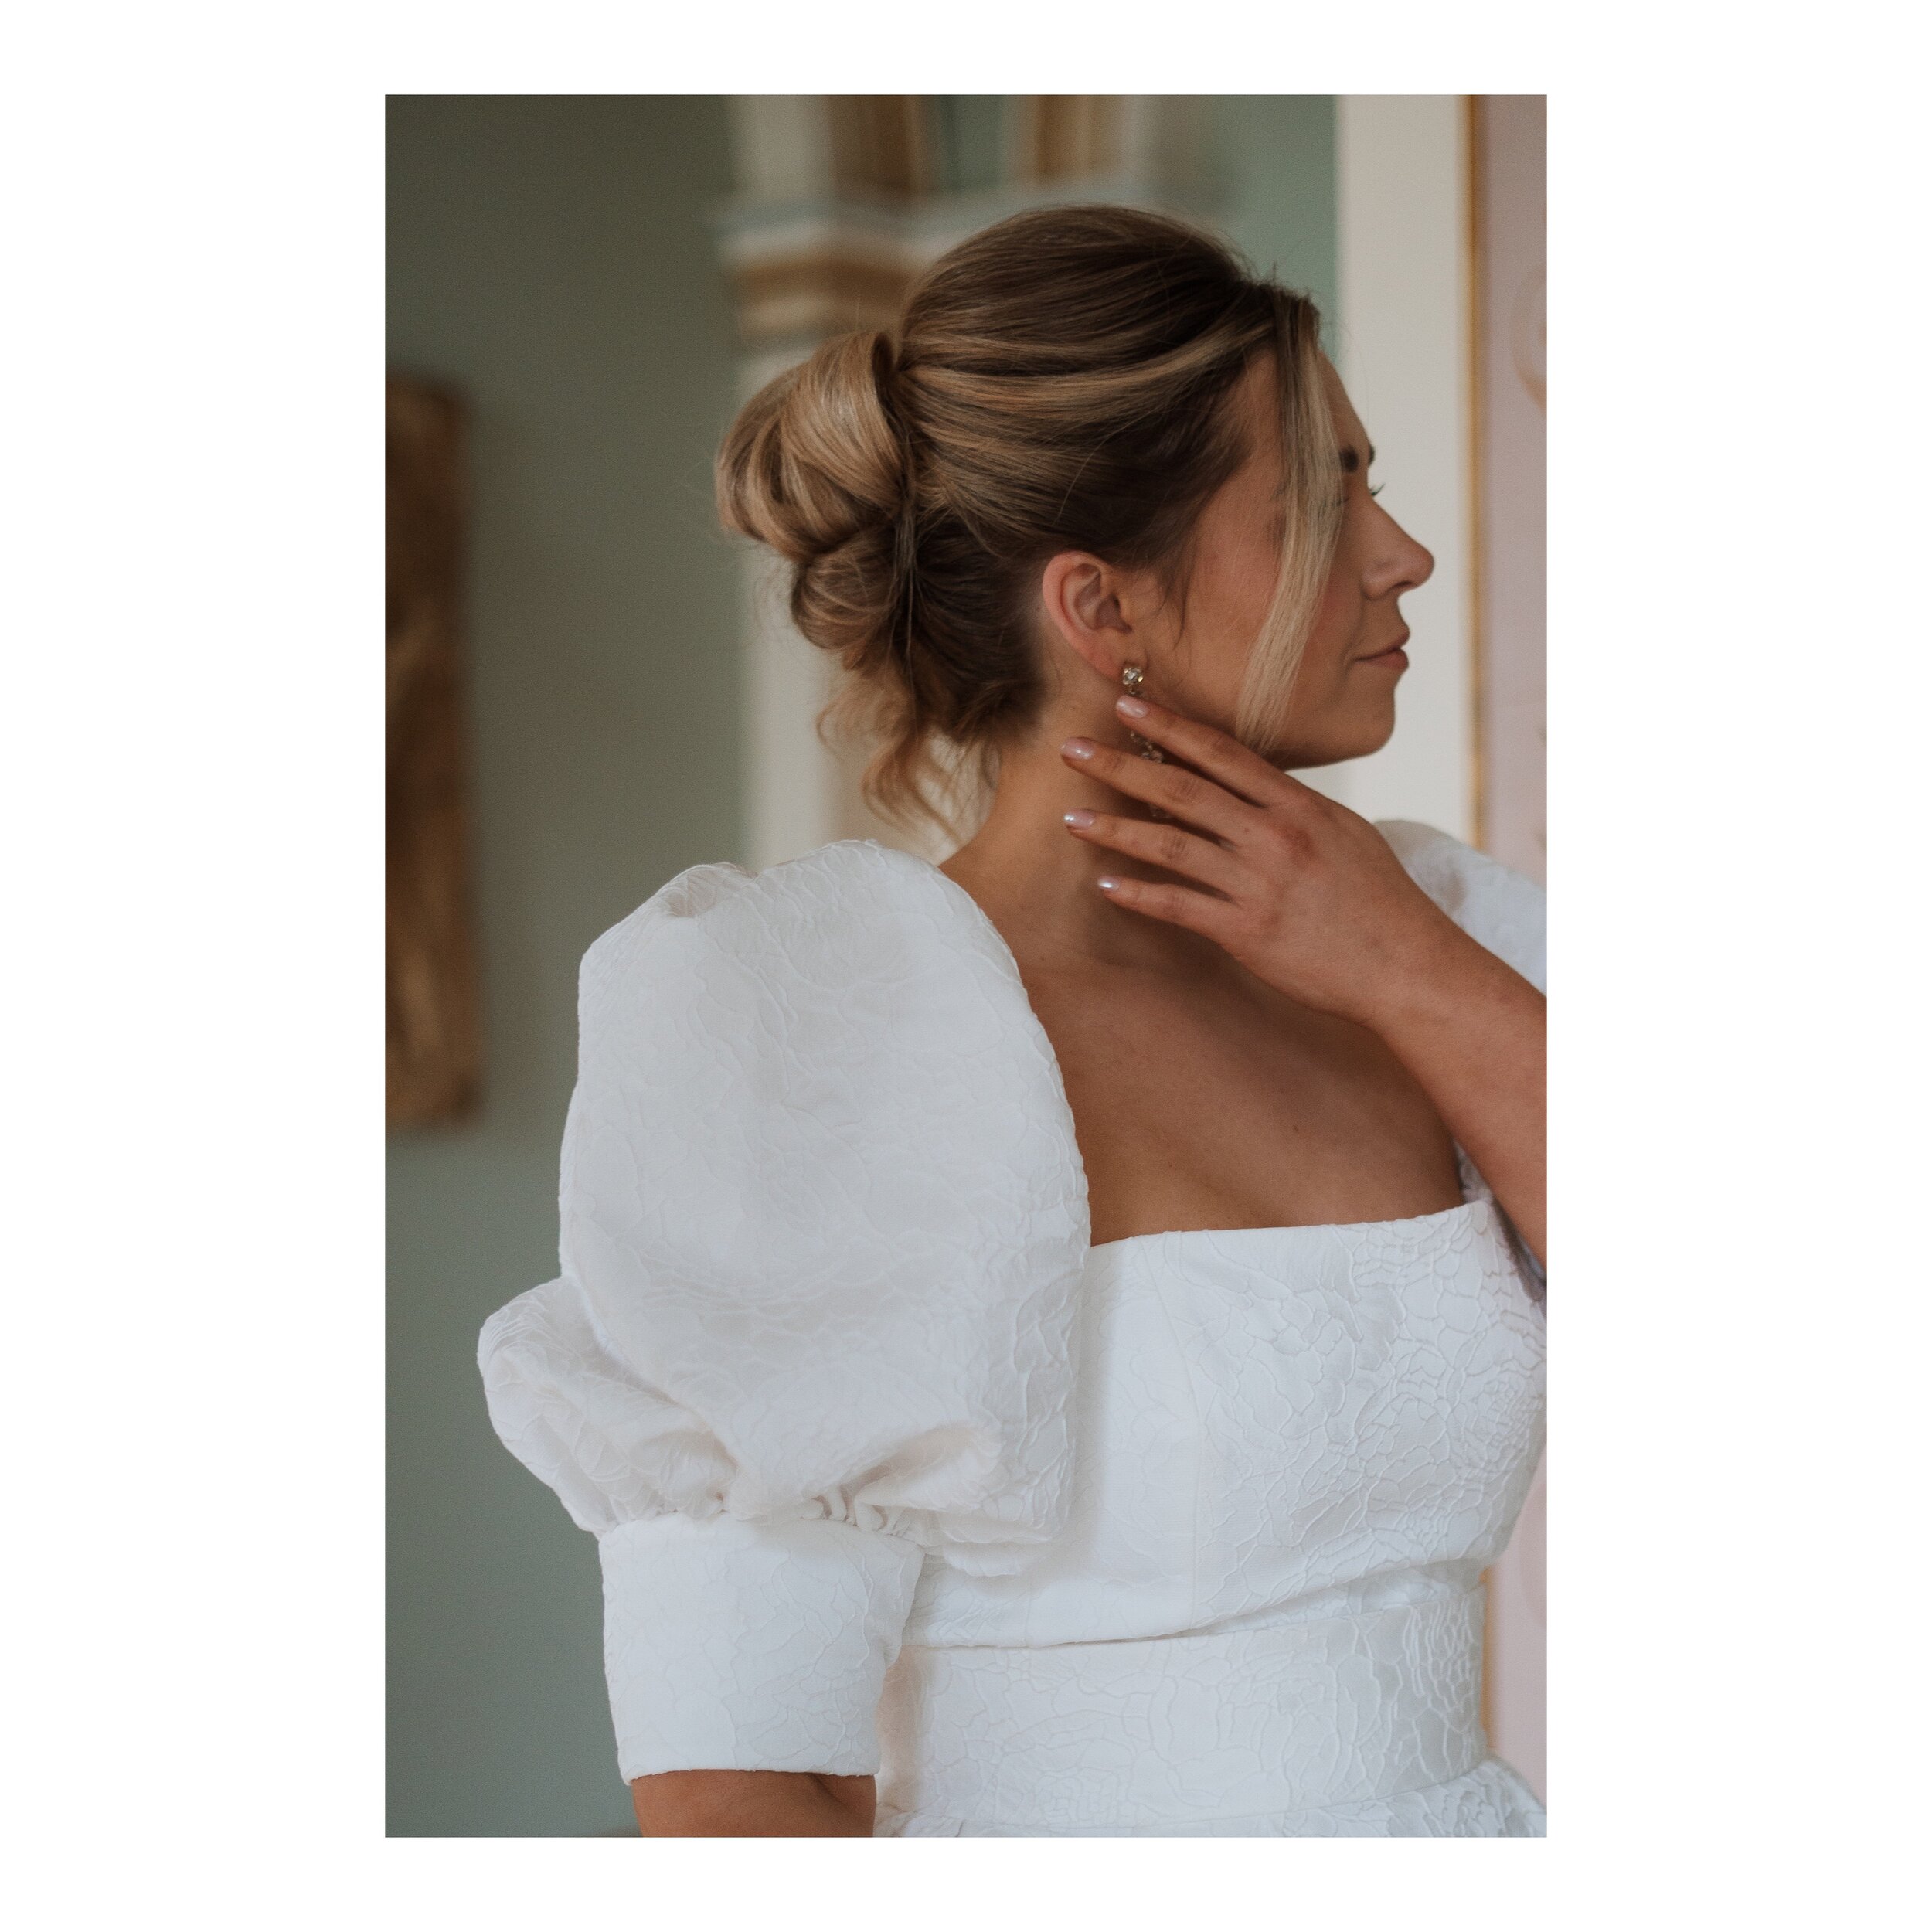 The consultation at the time of a trial is so important. I love to hear about styling ideas and seeing pictures of the dress, this allows me to help make the styling cohesive &amp; considered. 
Hair up is a great option for a statement dress like thi